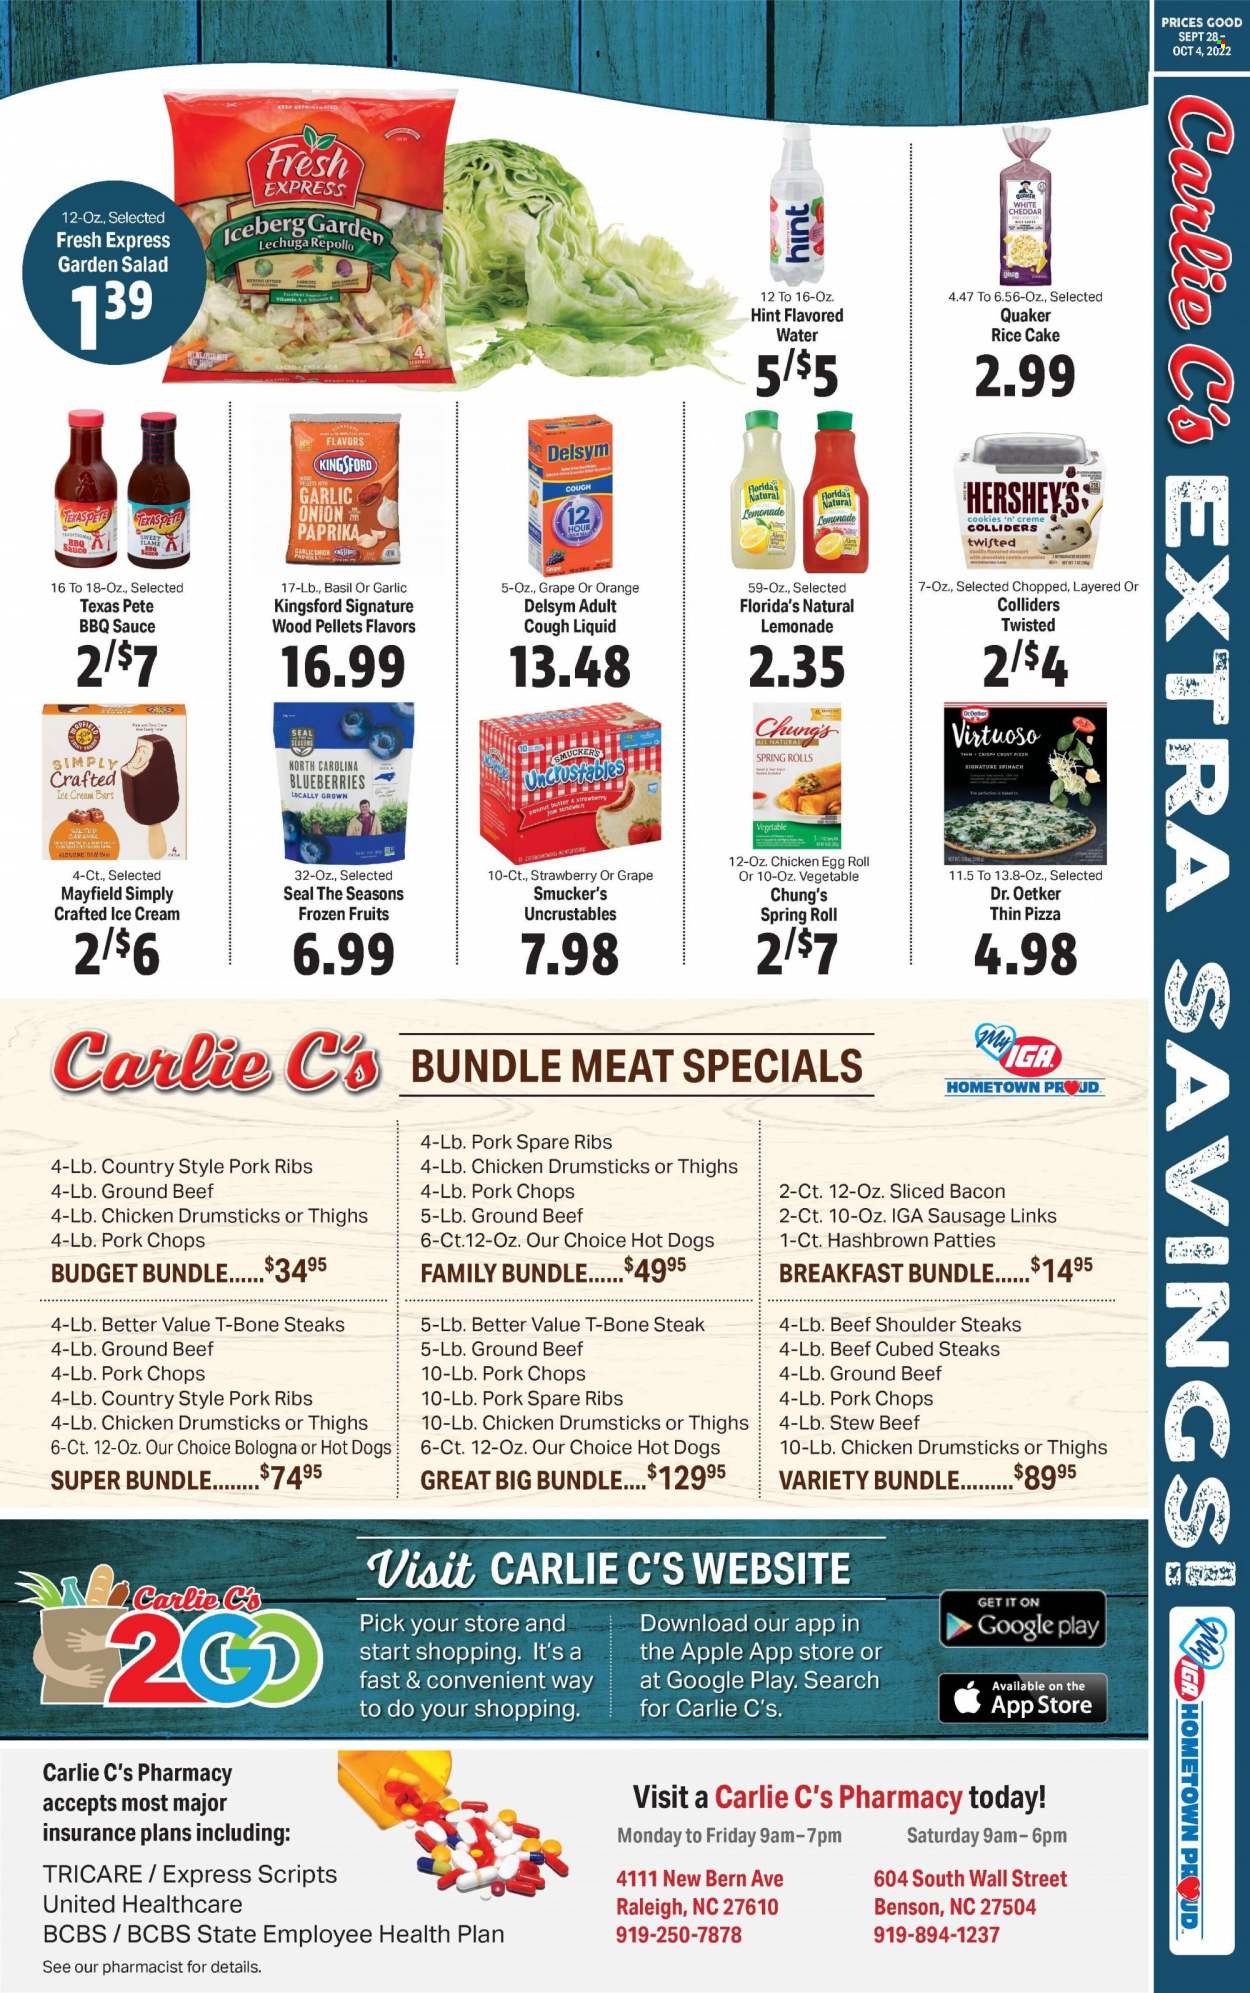 thumbnail - Carlie C's Flyer - 09/28/2022 - 10/04/2022 - Sales products - carrots, onion, salad, blueberries, oranges, hot dog, pizza, sauce, egg rolls, spring rolls, Quaker, Kingsford, bacon, bologna sausage, sausage, Dr. Oetker, eggs, ice cream, ice cream bars, Hershey's, cookies, Florida's Natural, BBQ sauce, caramel, peanut butter, lemonade, flavored water, chicken drumsticks, beef meat, ground beef, t-bone steak, steak, pork chops, pork meat, pork ribs, pork spare ribs, Delsym. Page 5.